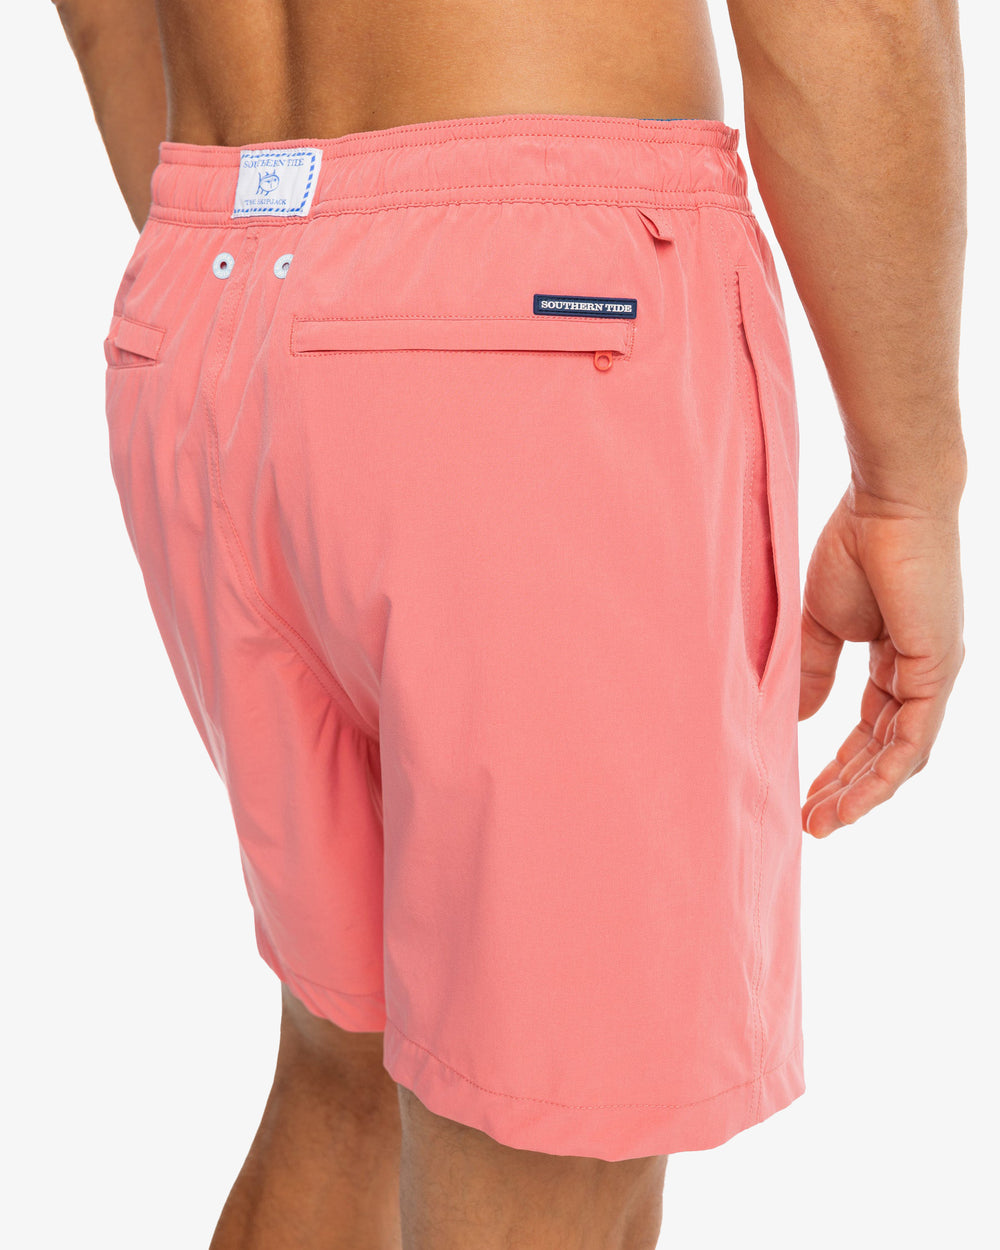 The model detail view of the Men's Solid Swim Trunk by Southern Tide - Rouge Red